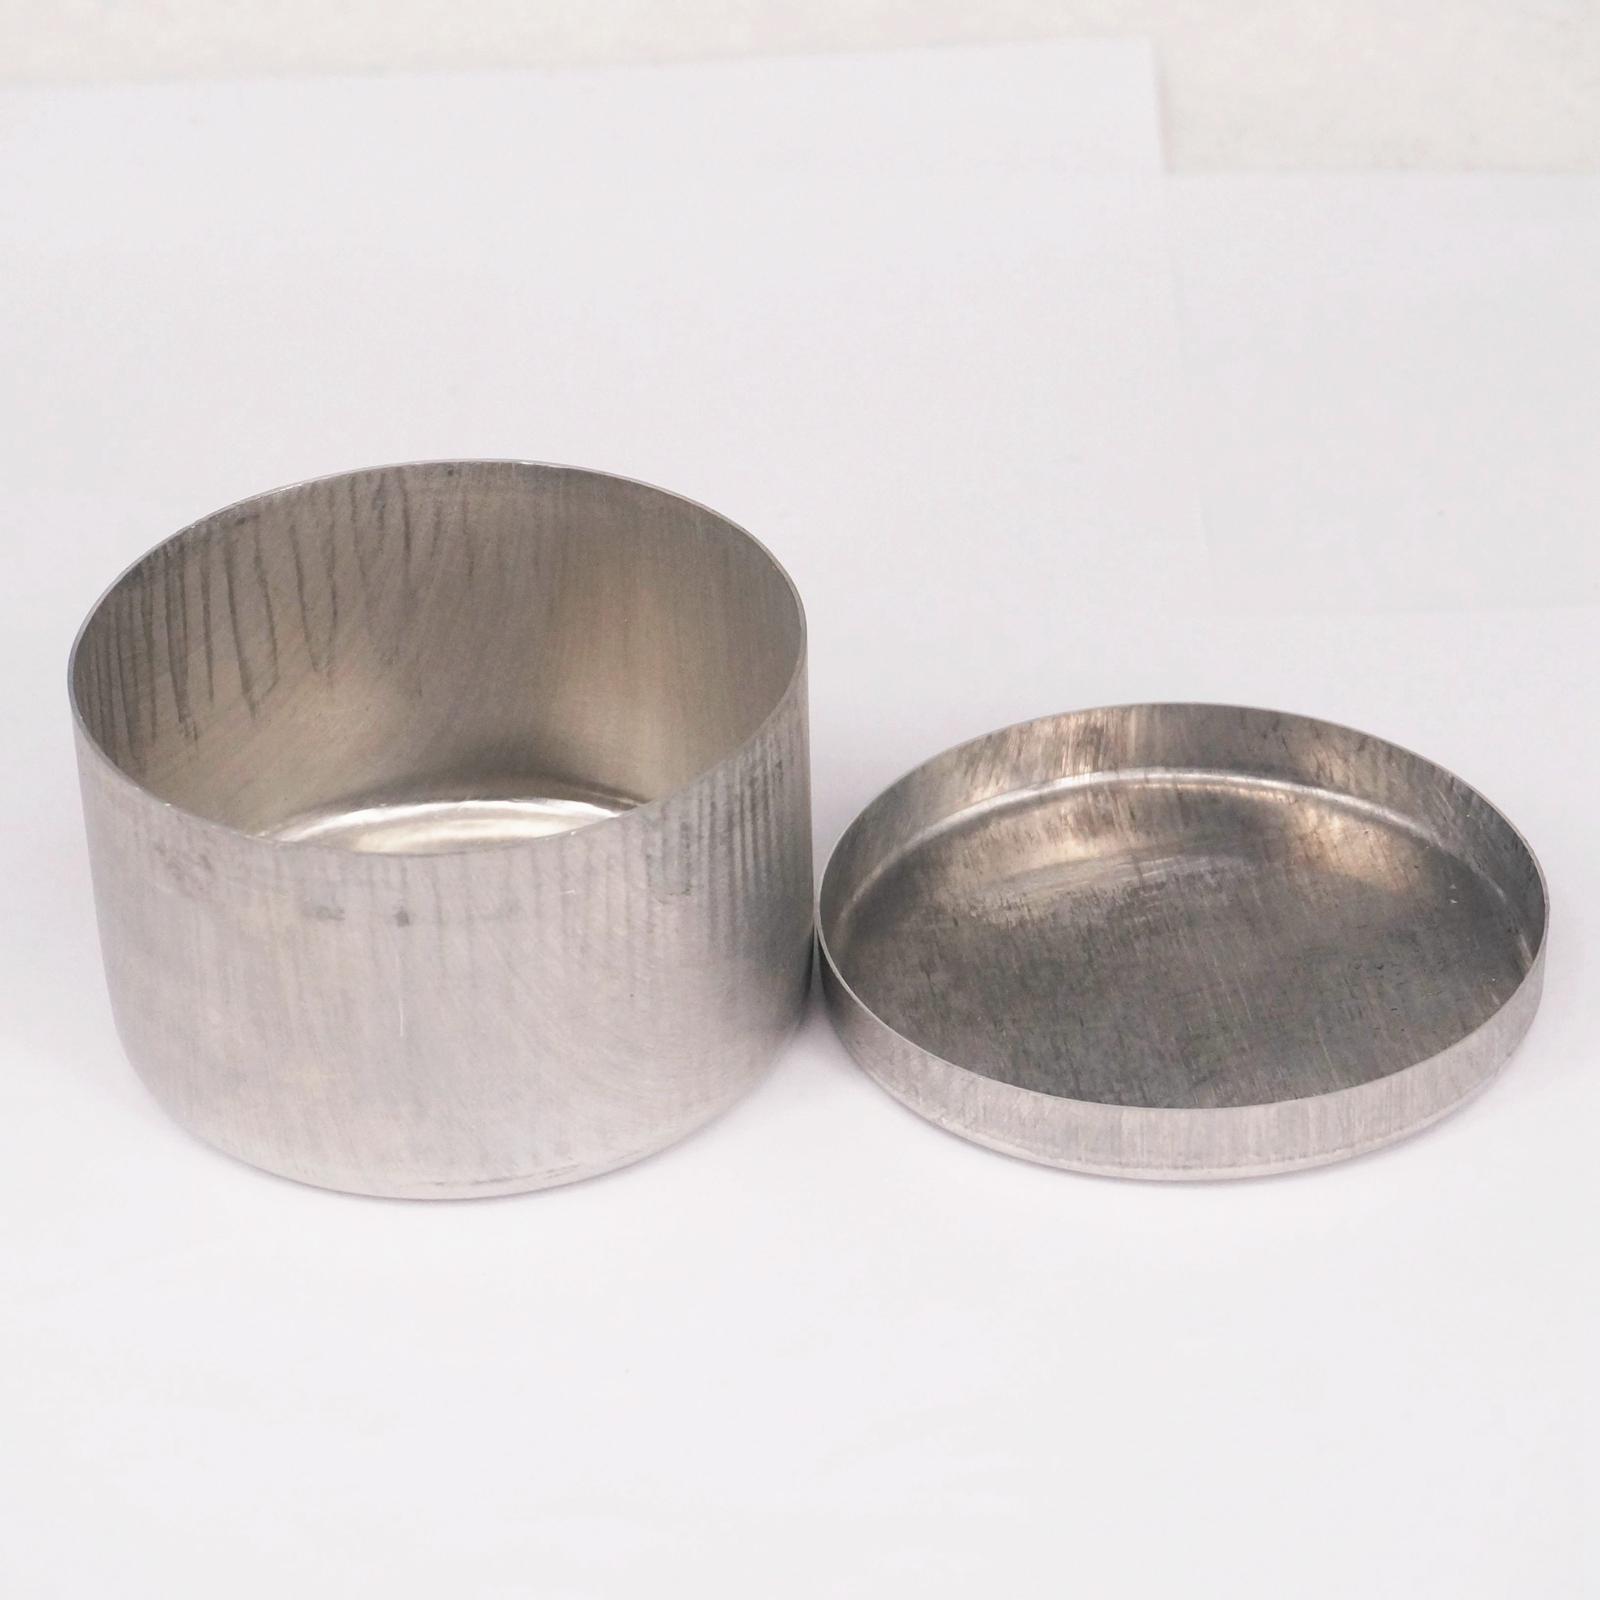 Outer Diameter From 40mm To 100mm Soil Specimen Lab Aluminum Cans For Moisture Measuring Instrument